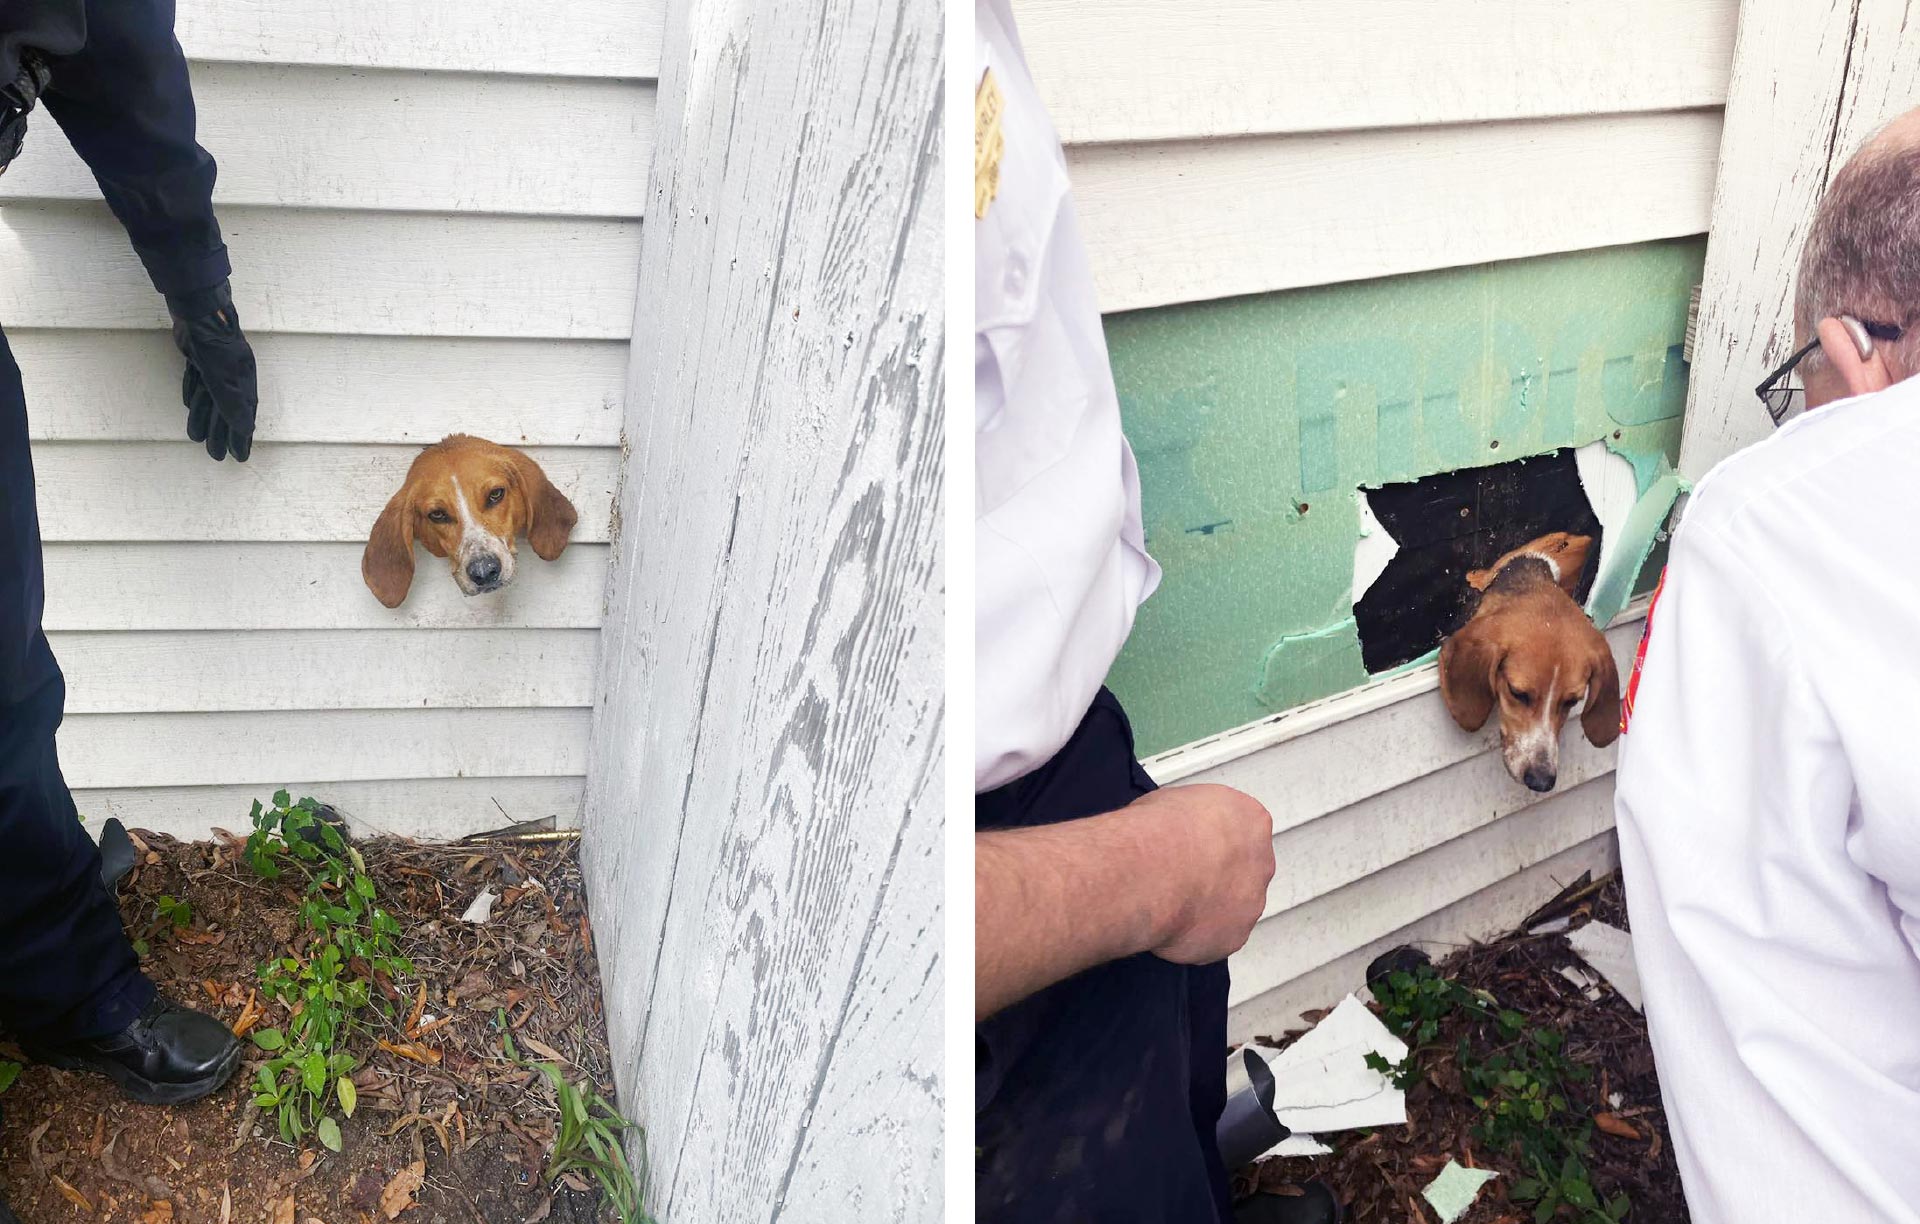 south-carolina-police-rescue-mischievous-pup-after-he-got-stuck-in-dryer-vent-2